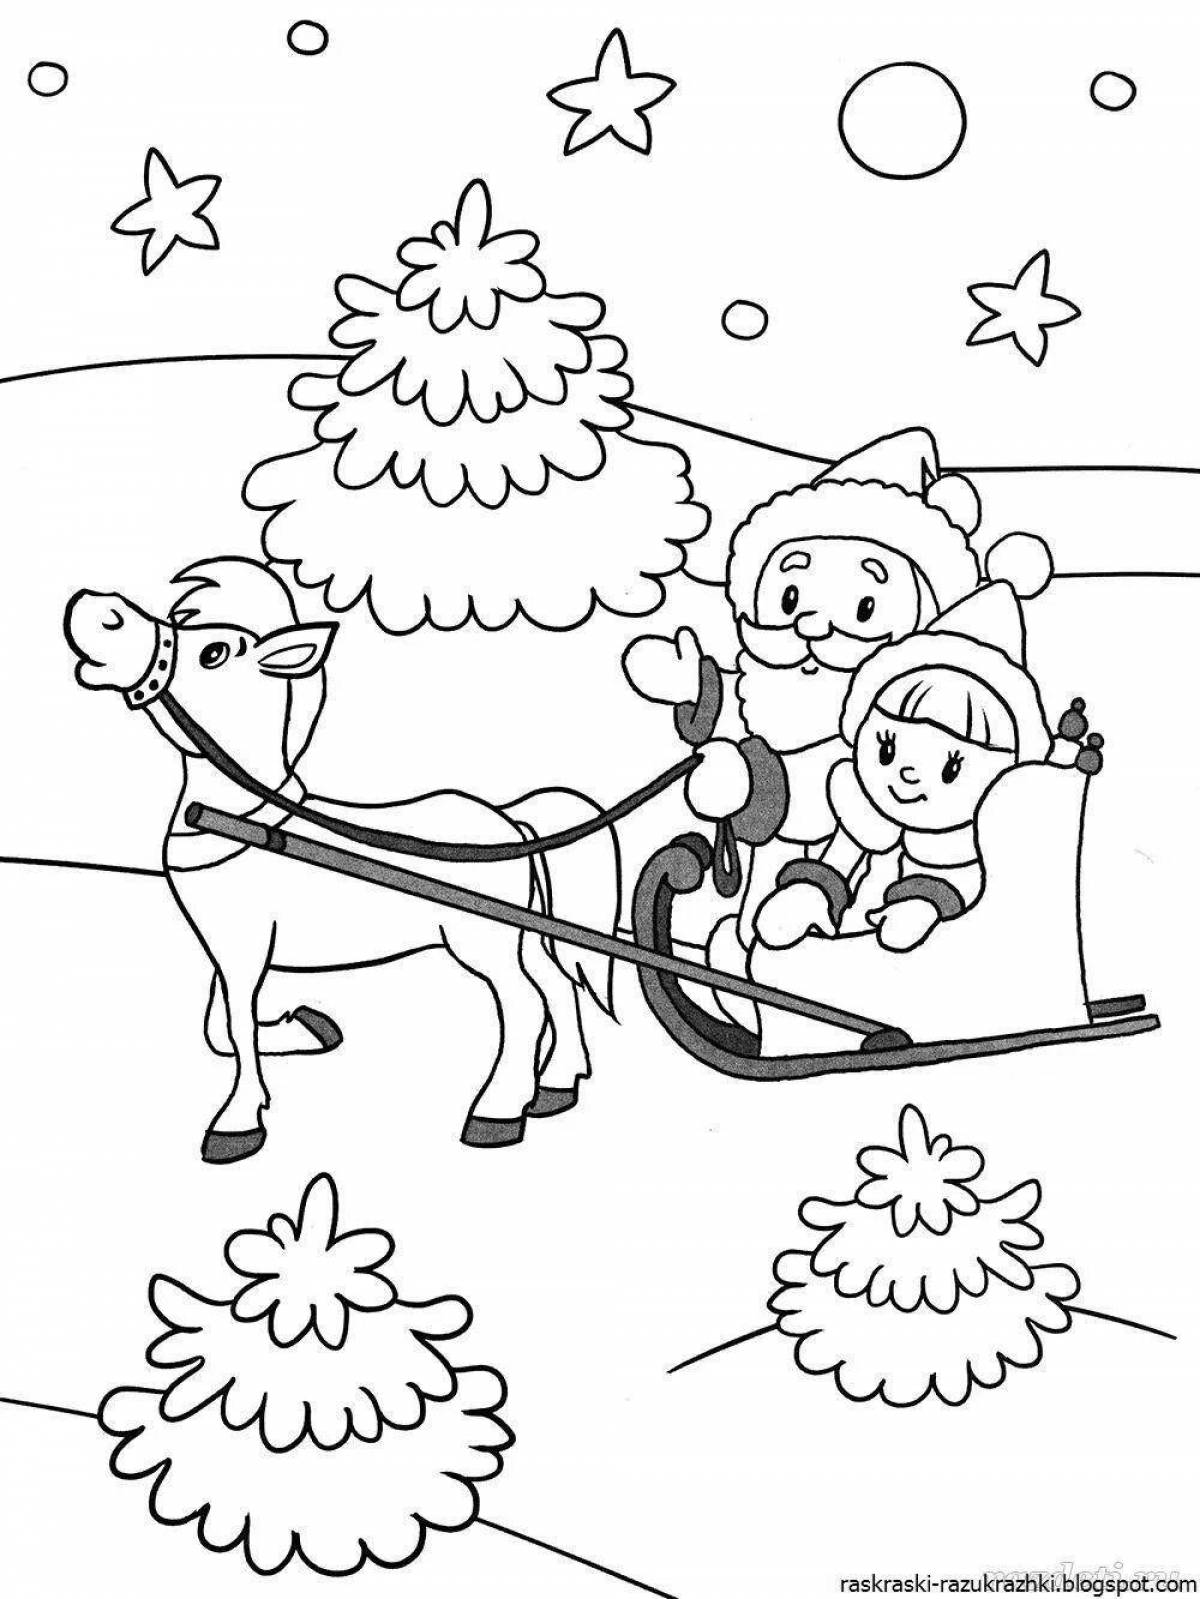 Magical children's winter coloring book